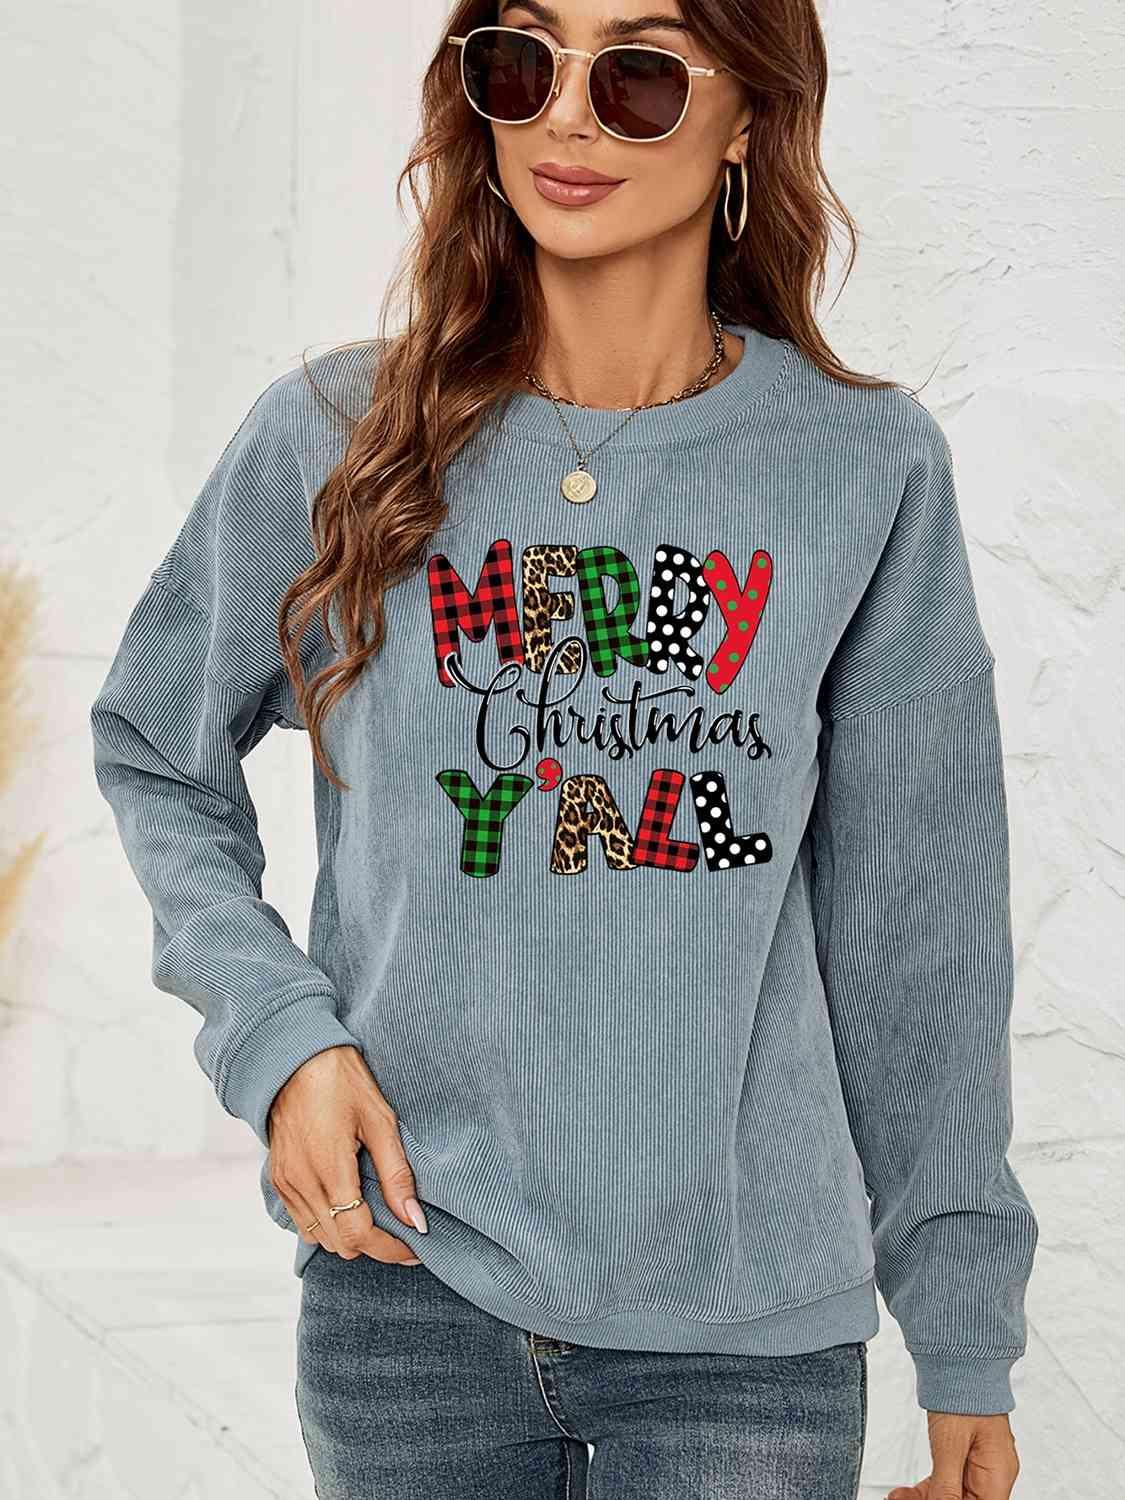 Merry Christmas Y'all Graphic Sweatshirt - God's Girl Gifts And Apparel